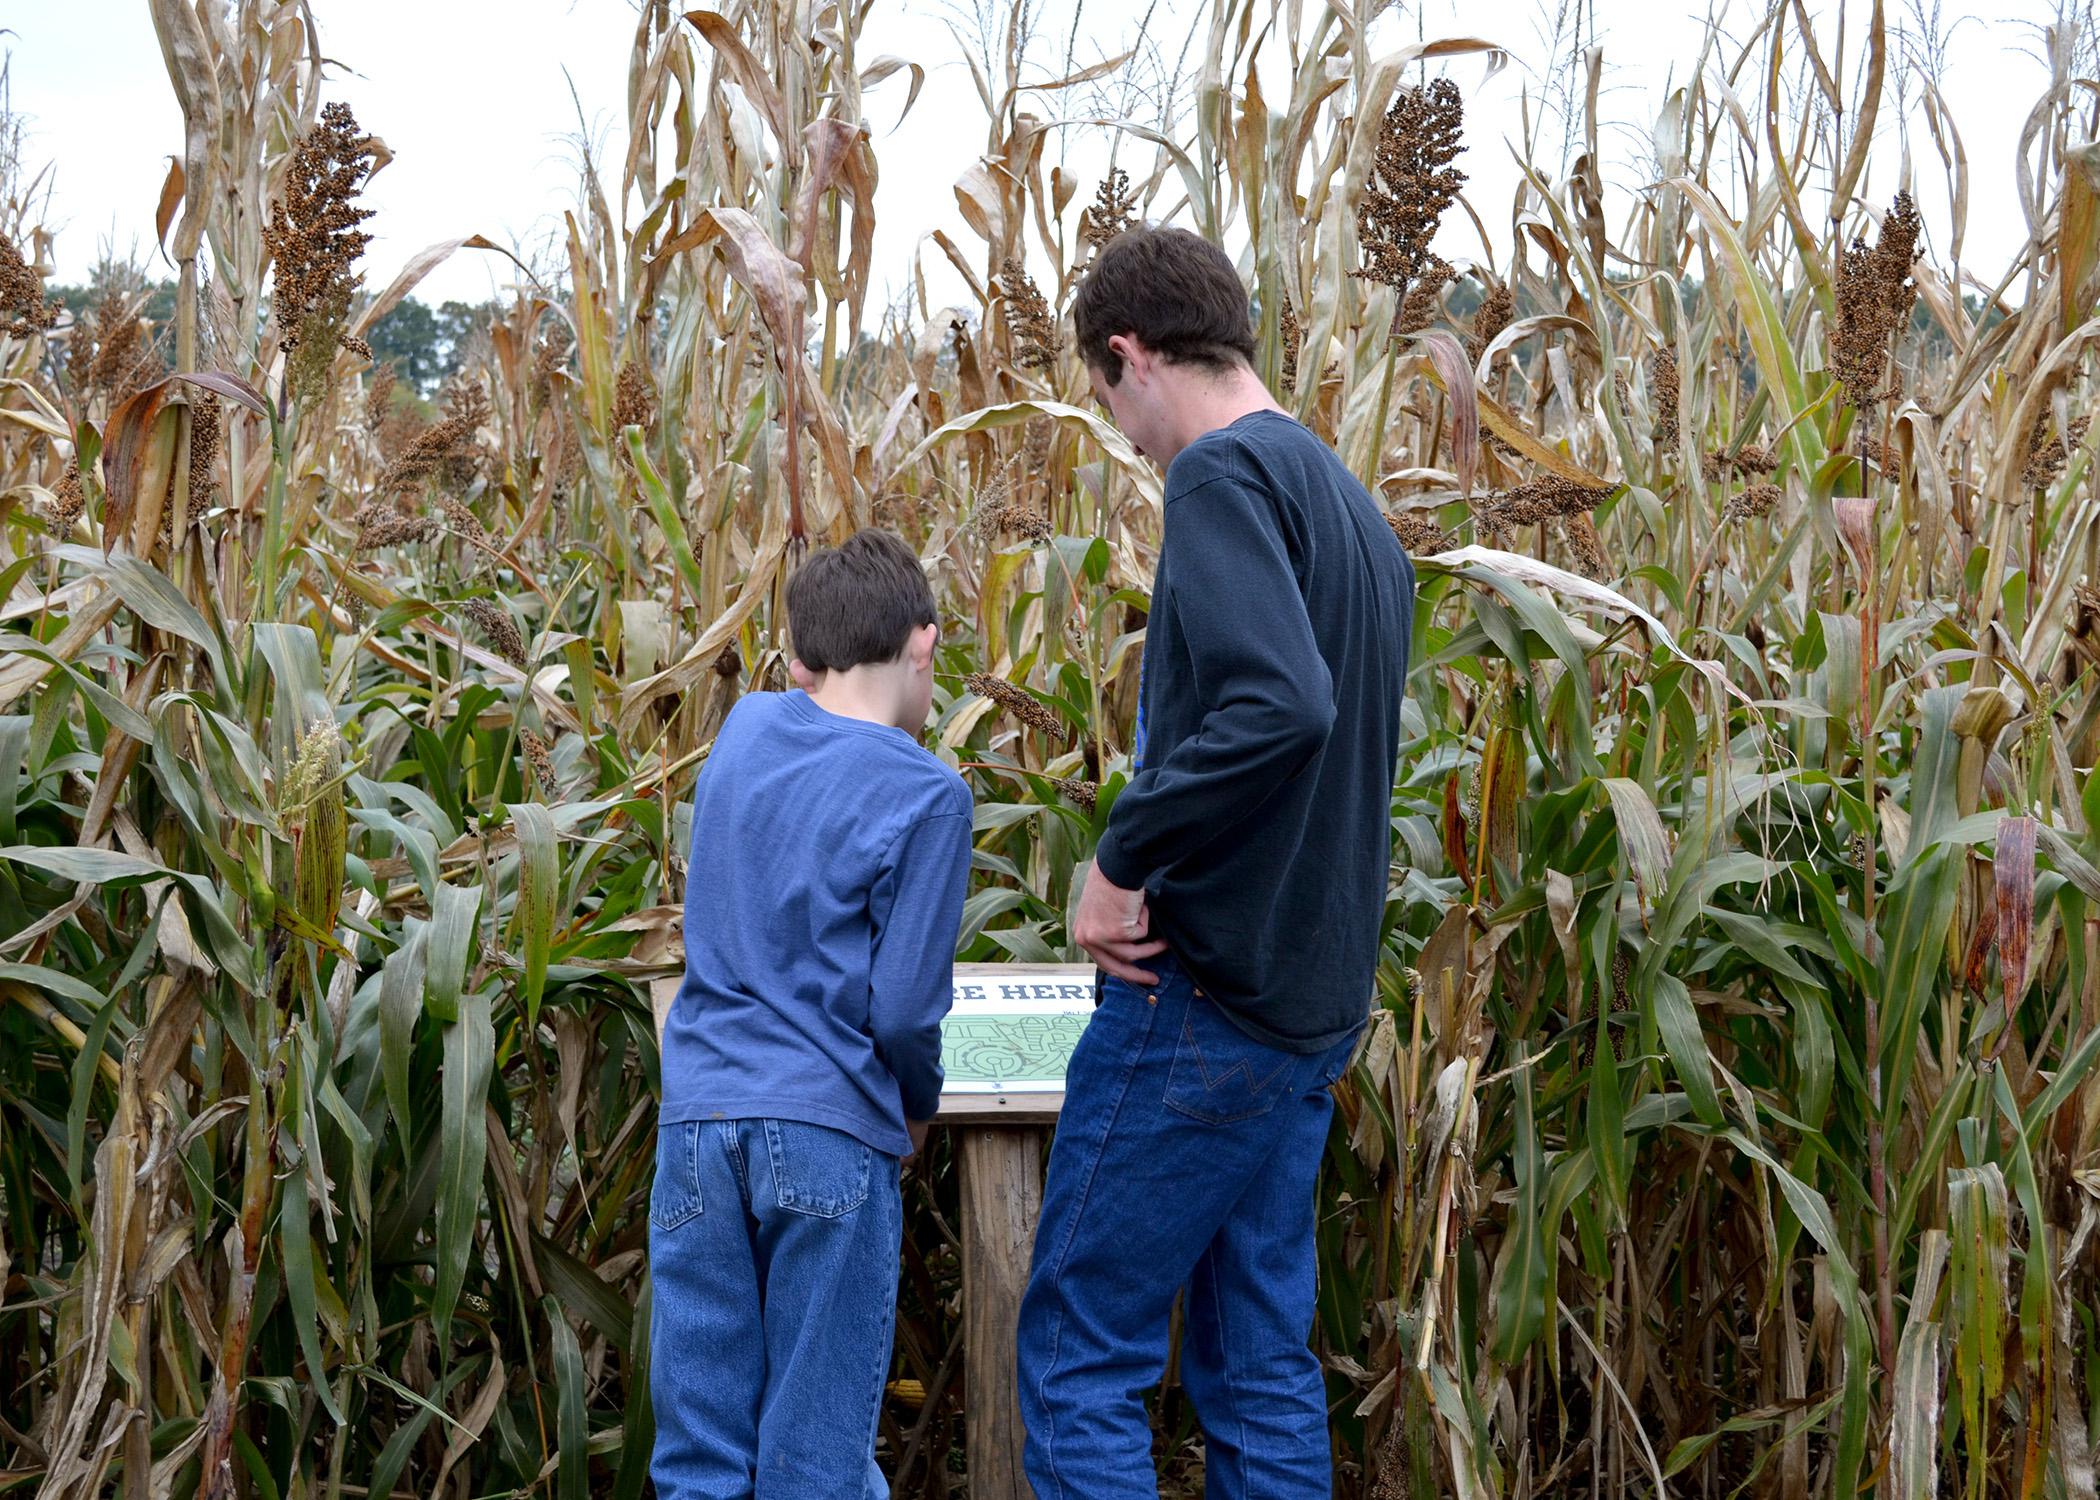 Maps can be helpful for all ages finding their way through corn mazes, as these brothers discovered in northwest Arkansas on Oct. 26, 2013. Landowners with an interest in agritourism also need guidance through the maze of liability issues. (Photo by MSU Ag Communications/ Linda Breazeale)